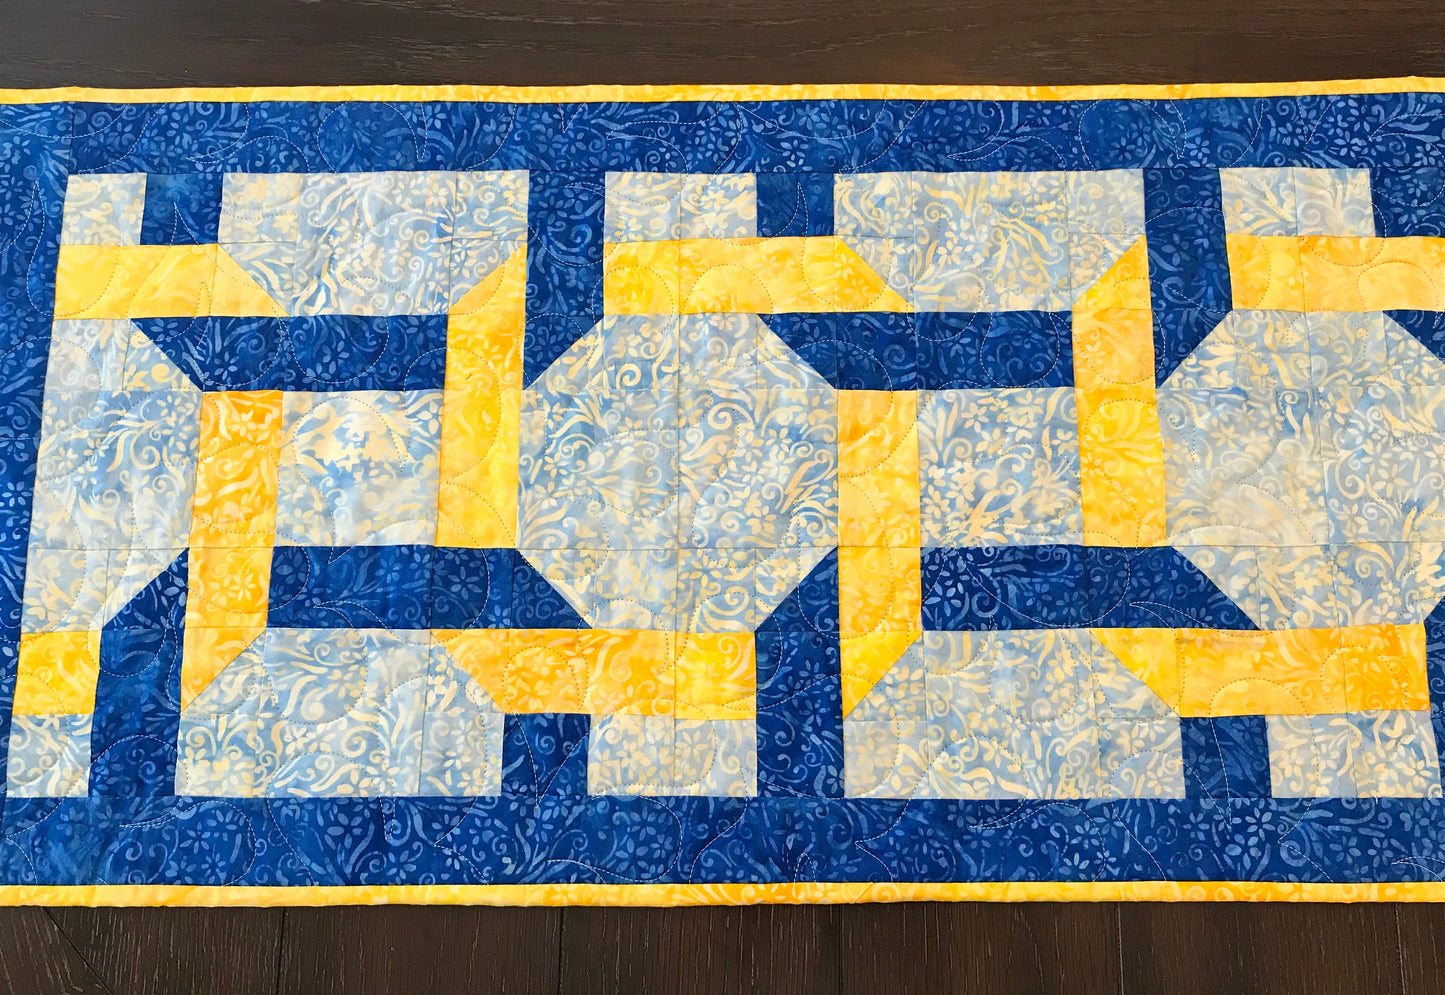 Pattern for blue and yellow table runner with woven corners through three large squares. Woven Squares pattern.